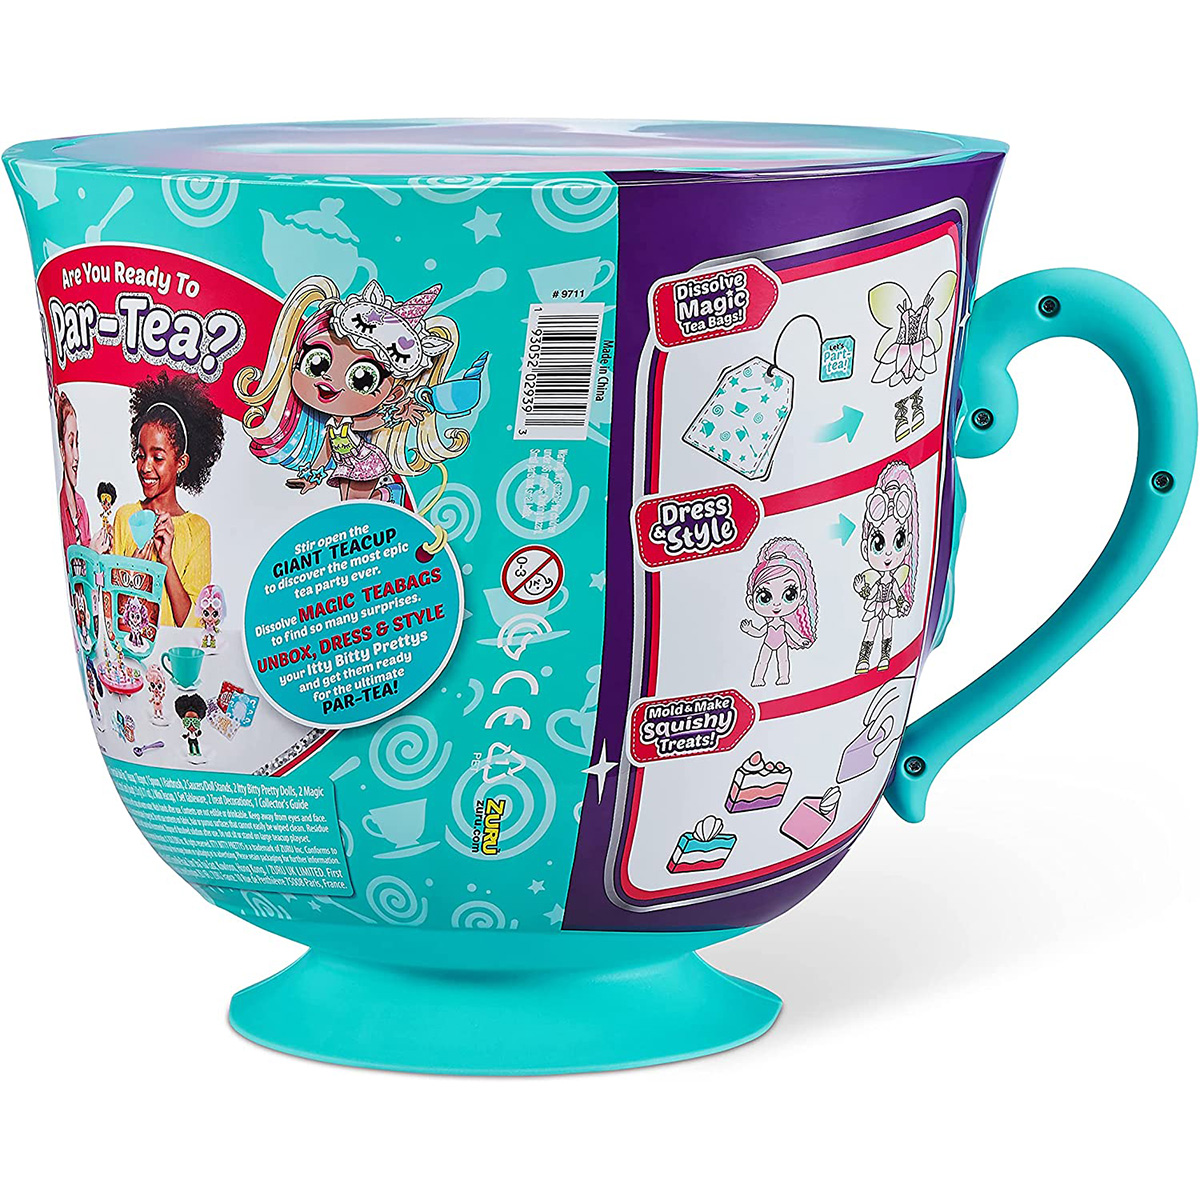  Itty Bitty Prettys 2-Pack Tea Party Surprise Series 2